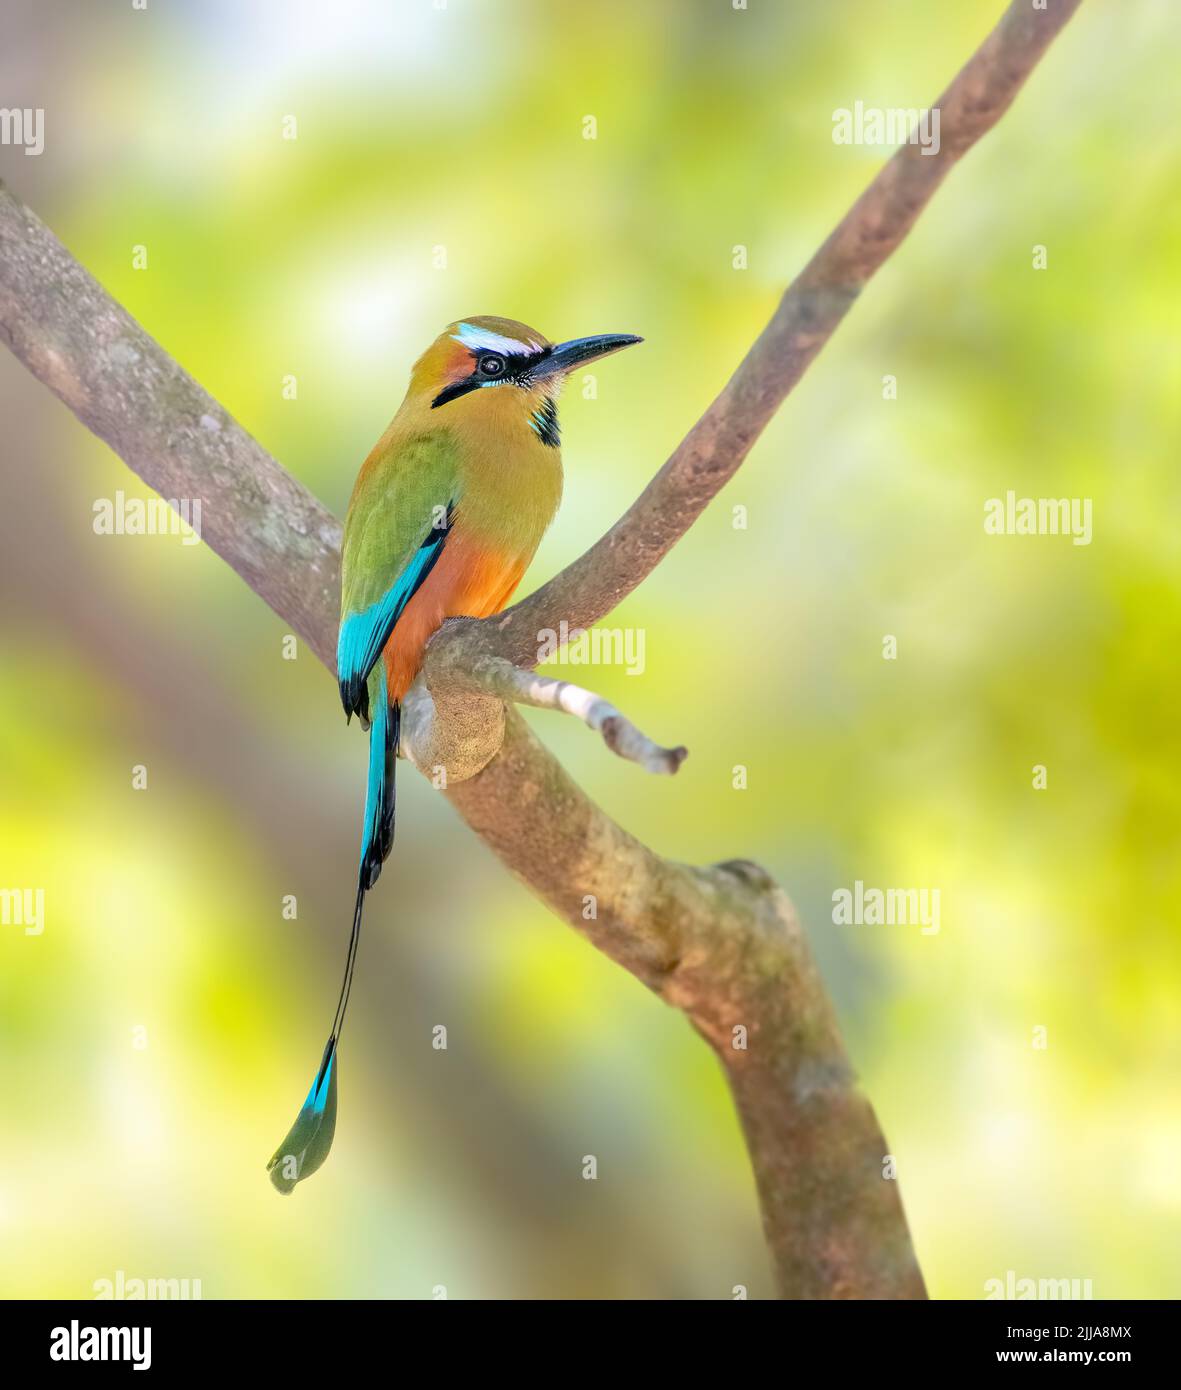 Turquoise browed motmot perched on a tree Stock Photo